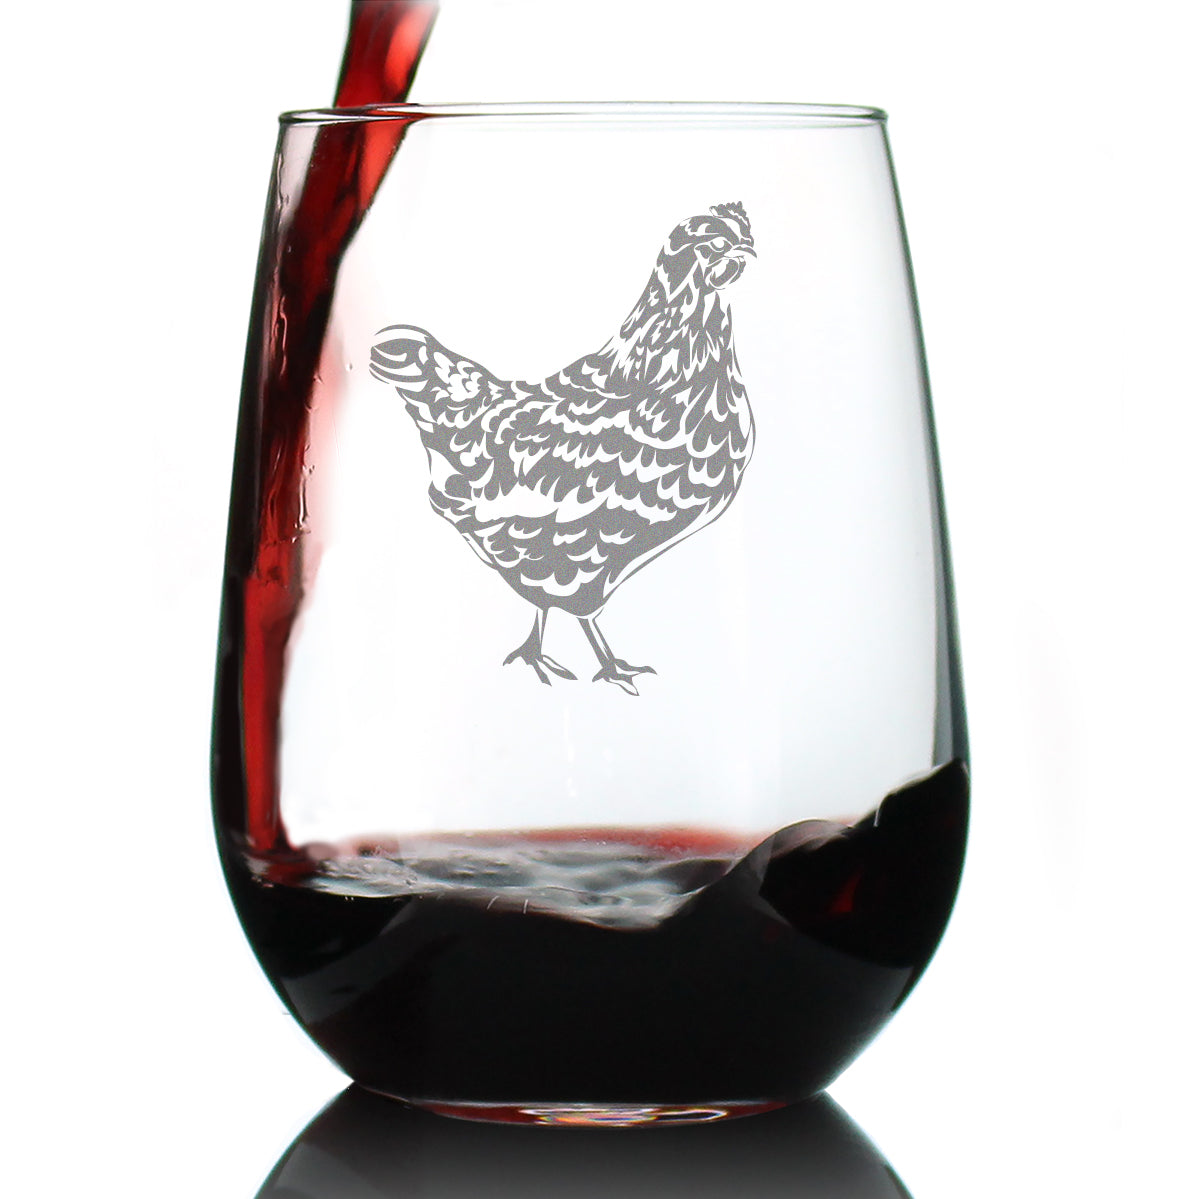 Hen - Cute Stemless Wine Glass - Farmhouse Decor Gifts for Lovers of Hens and Wine - 17 Oz Large Glasses